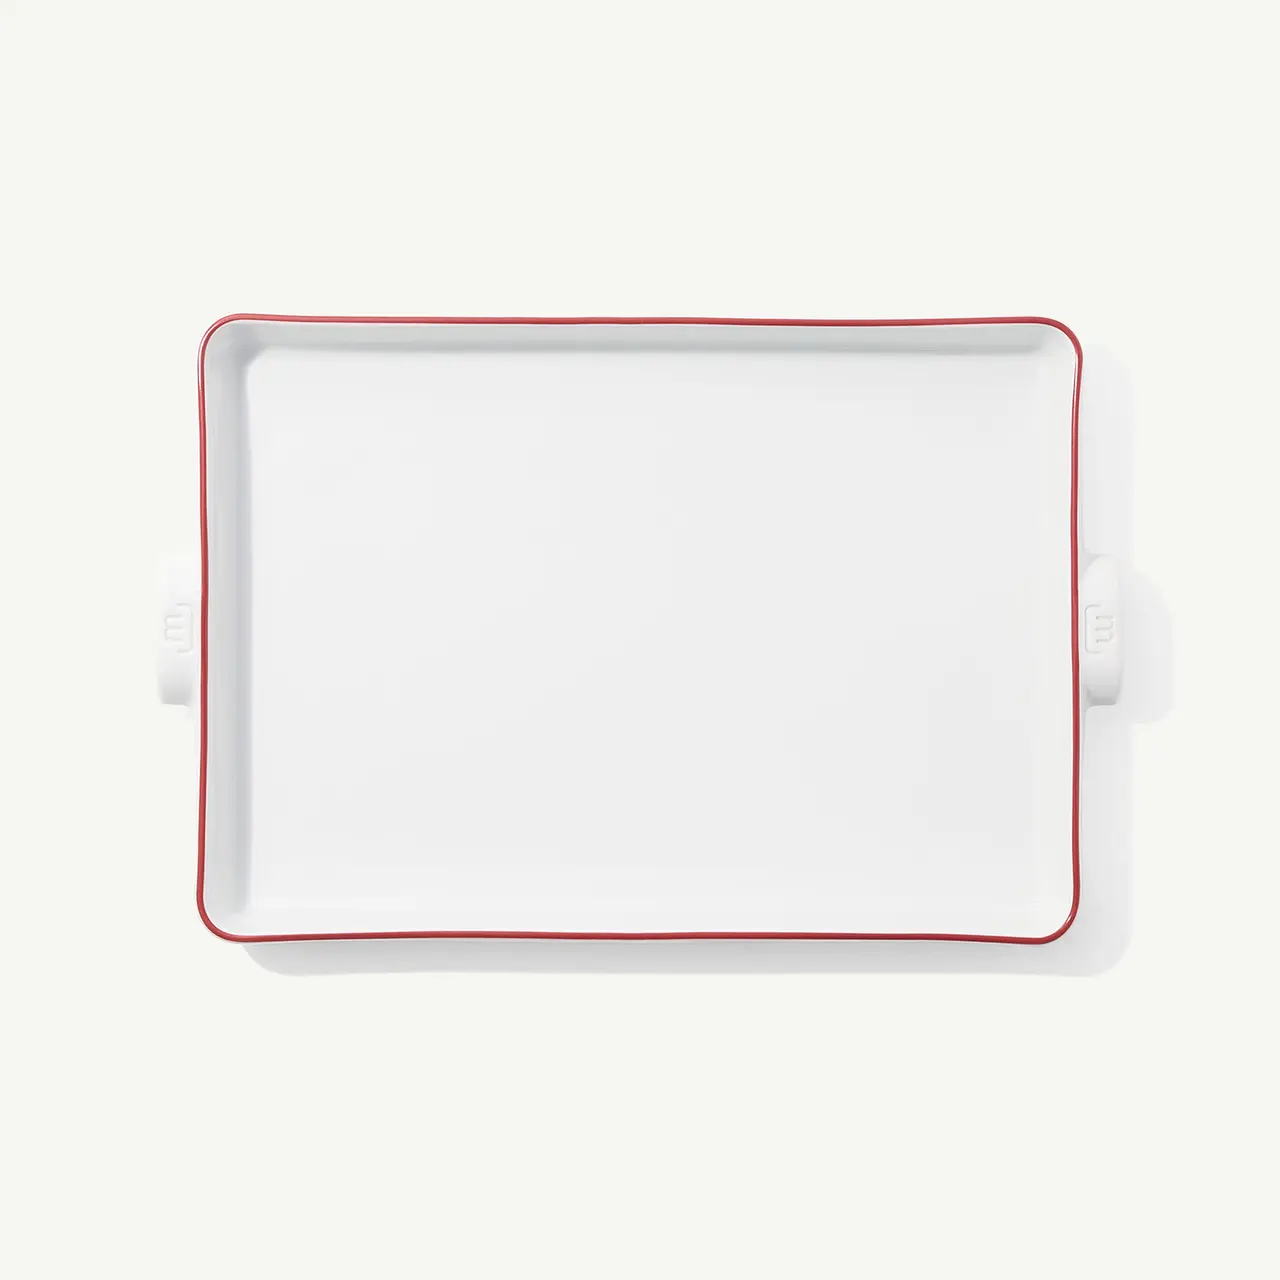 A plain white rectangular serving platter with a red trim is centered on a white background.